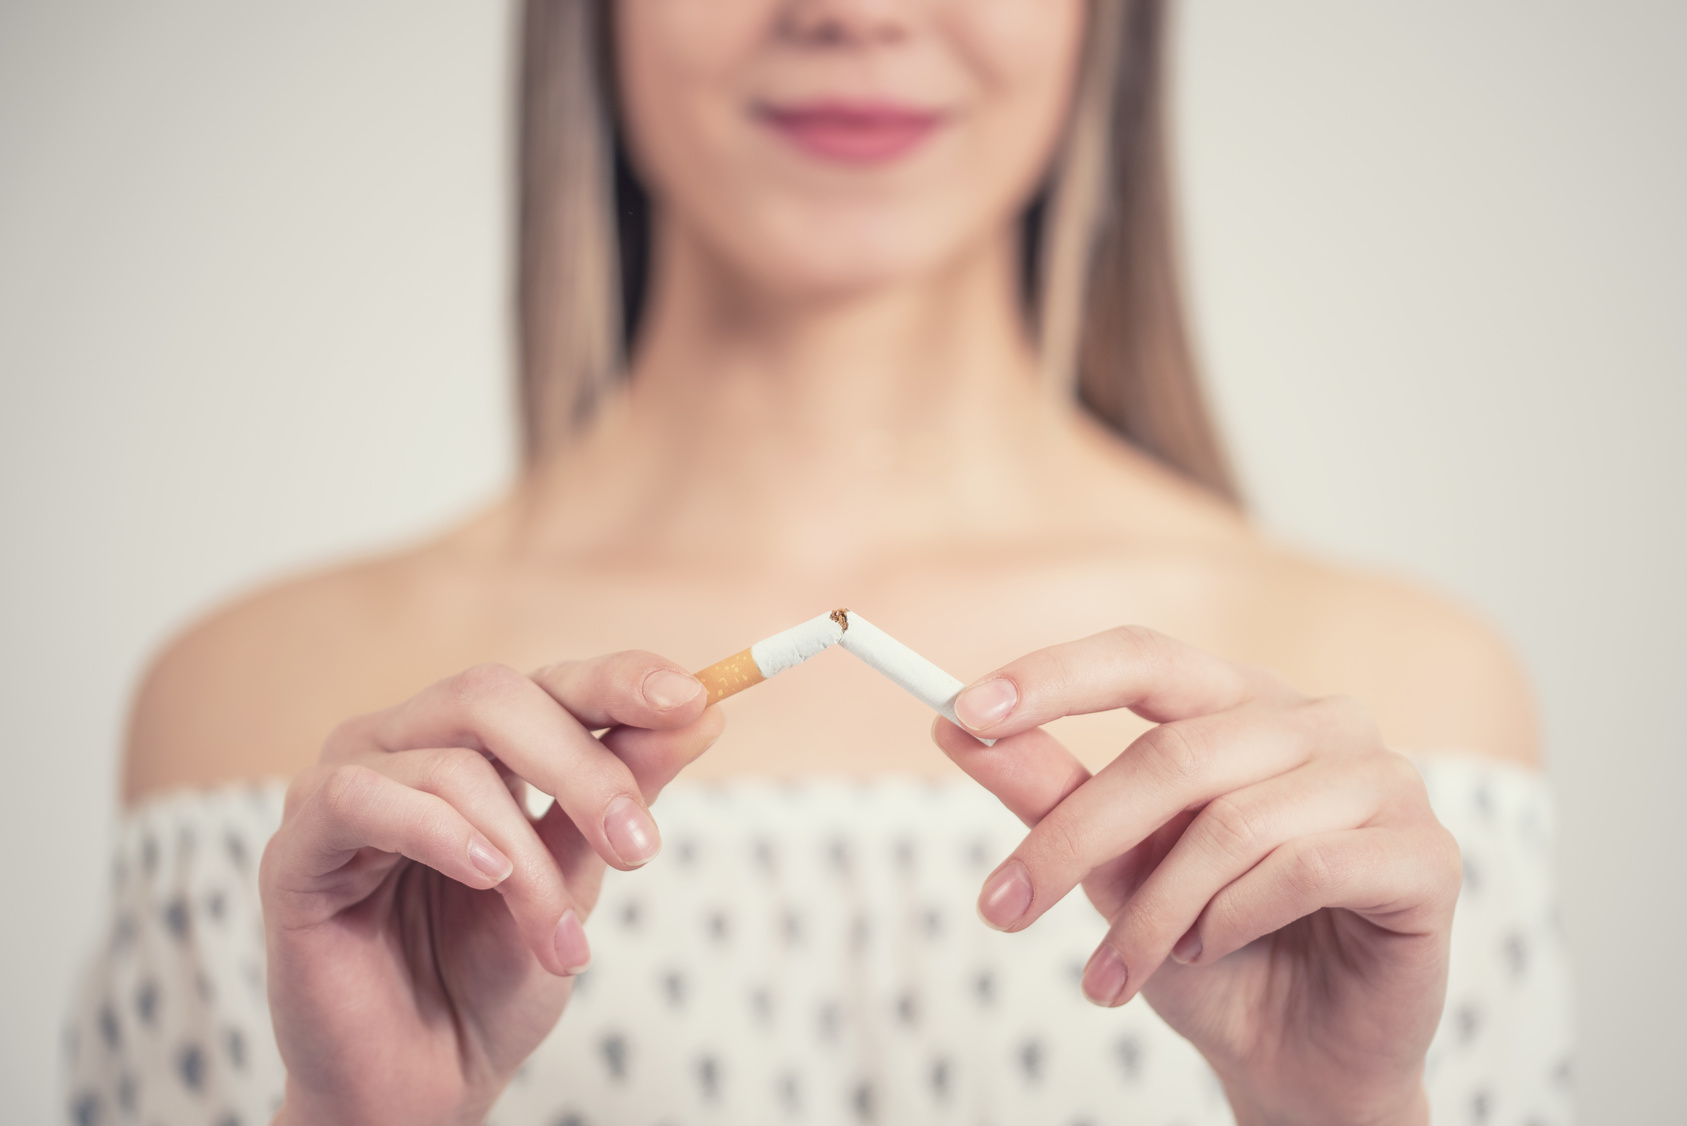 FDA Supports New Steps to Further Nicotine Replacement Therapy Research